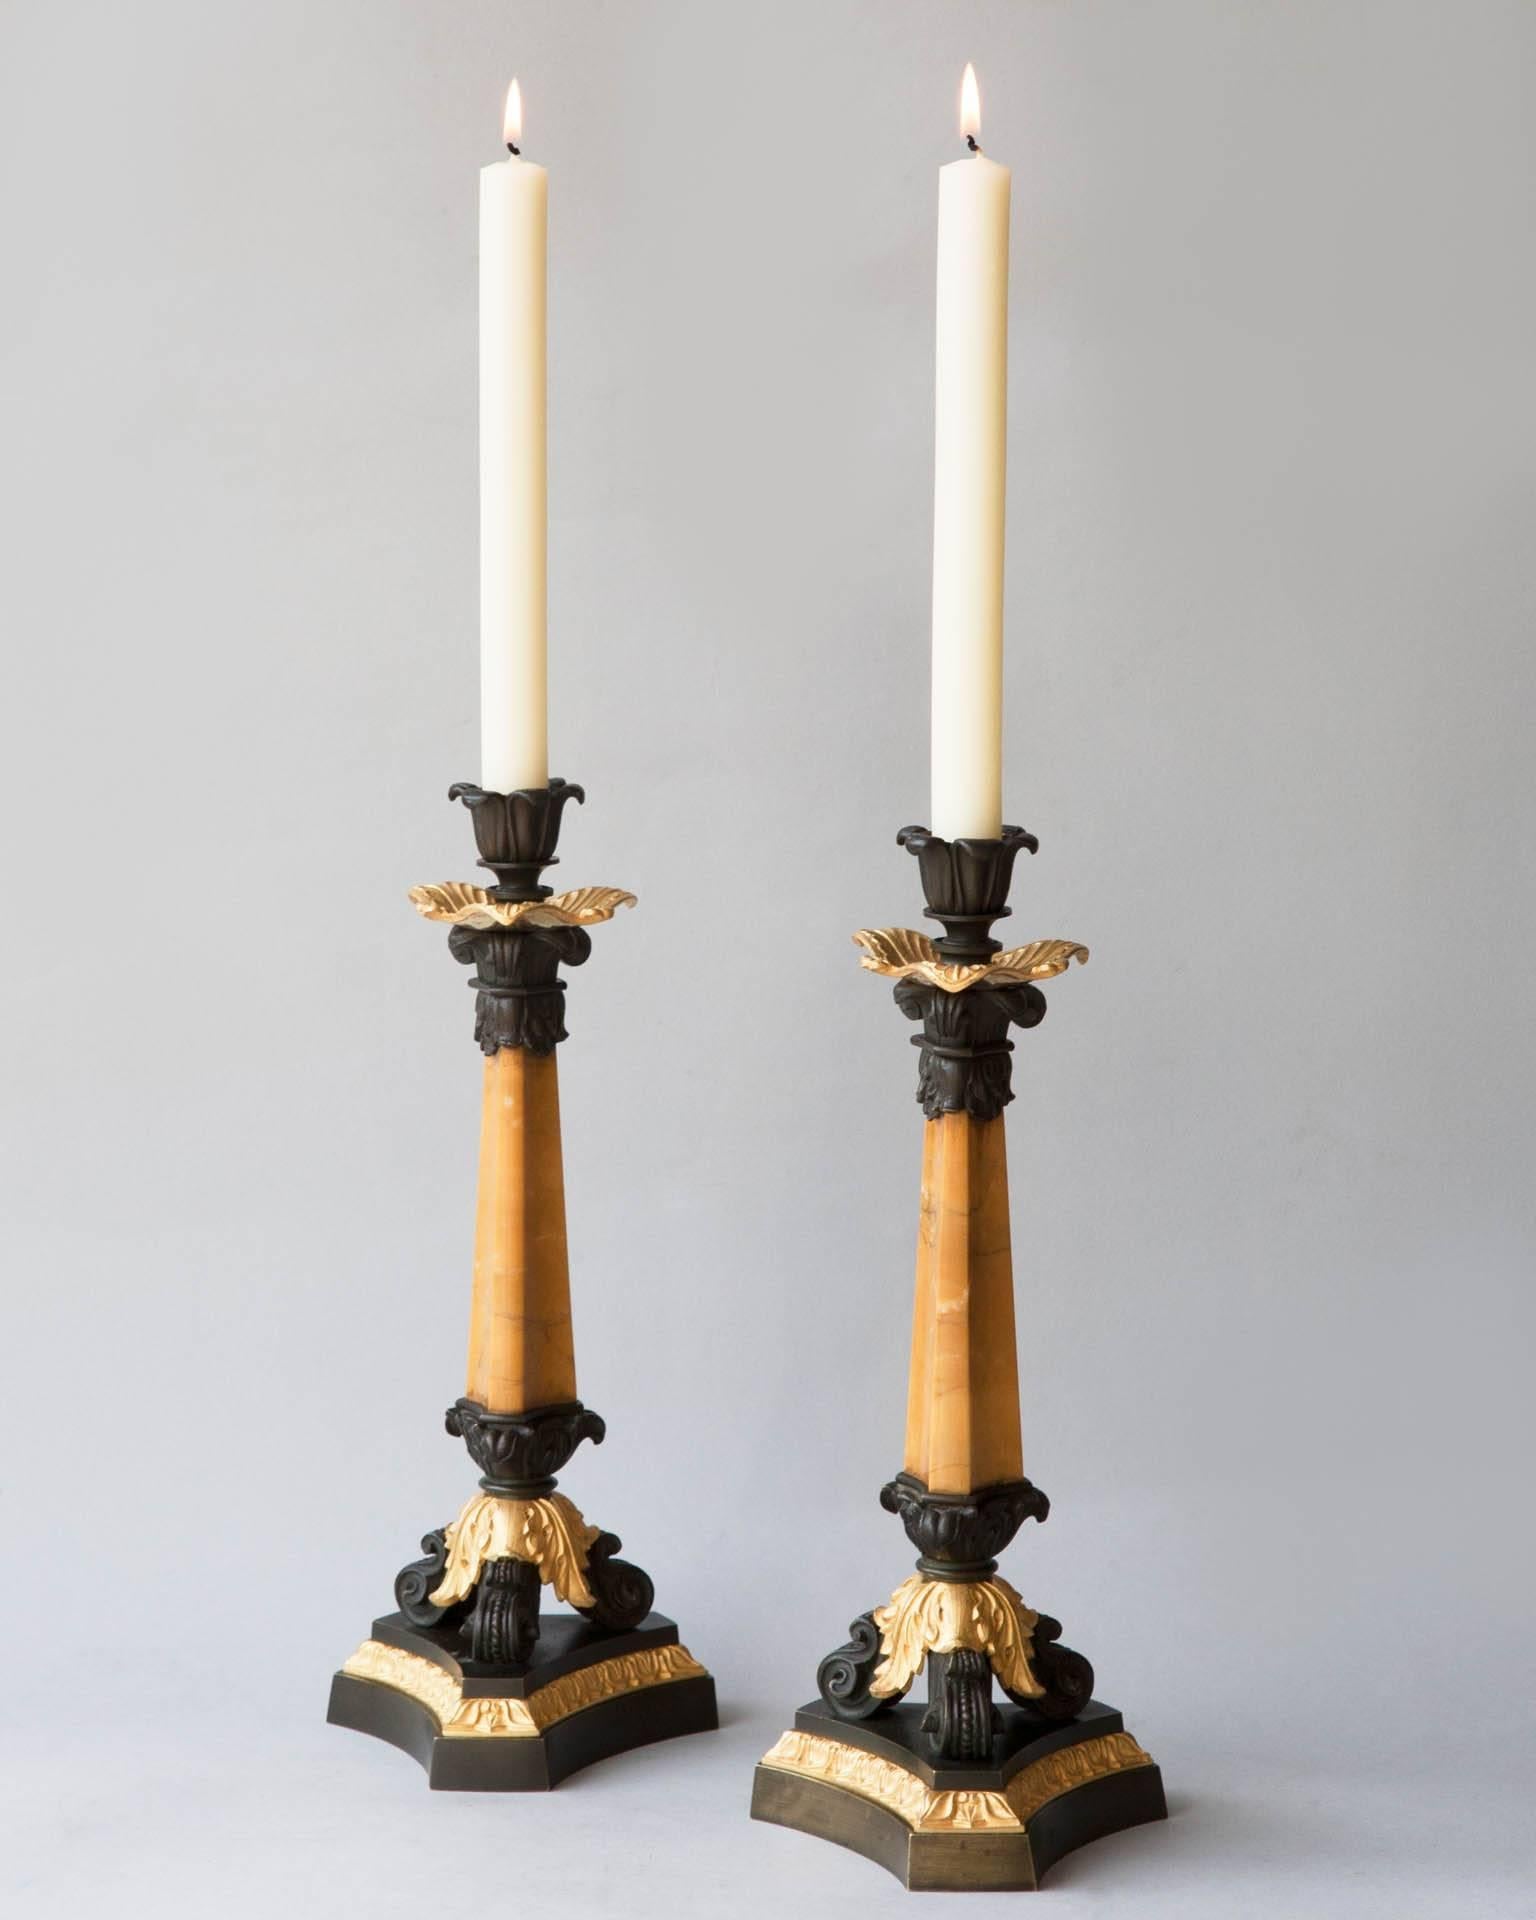 Pair of early 19th century candlesticks, the central pyramid column in Sienna marble, with patinated bronze Corinthian capitol and gilt bronze leaf decoration.
With three scrolling patinated bronze feet and gilt bronze acanthus leaf decoration